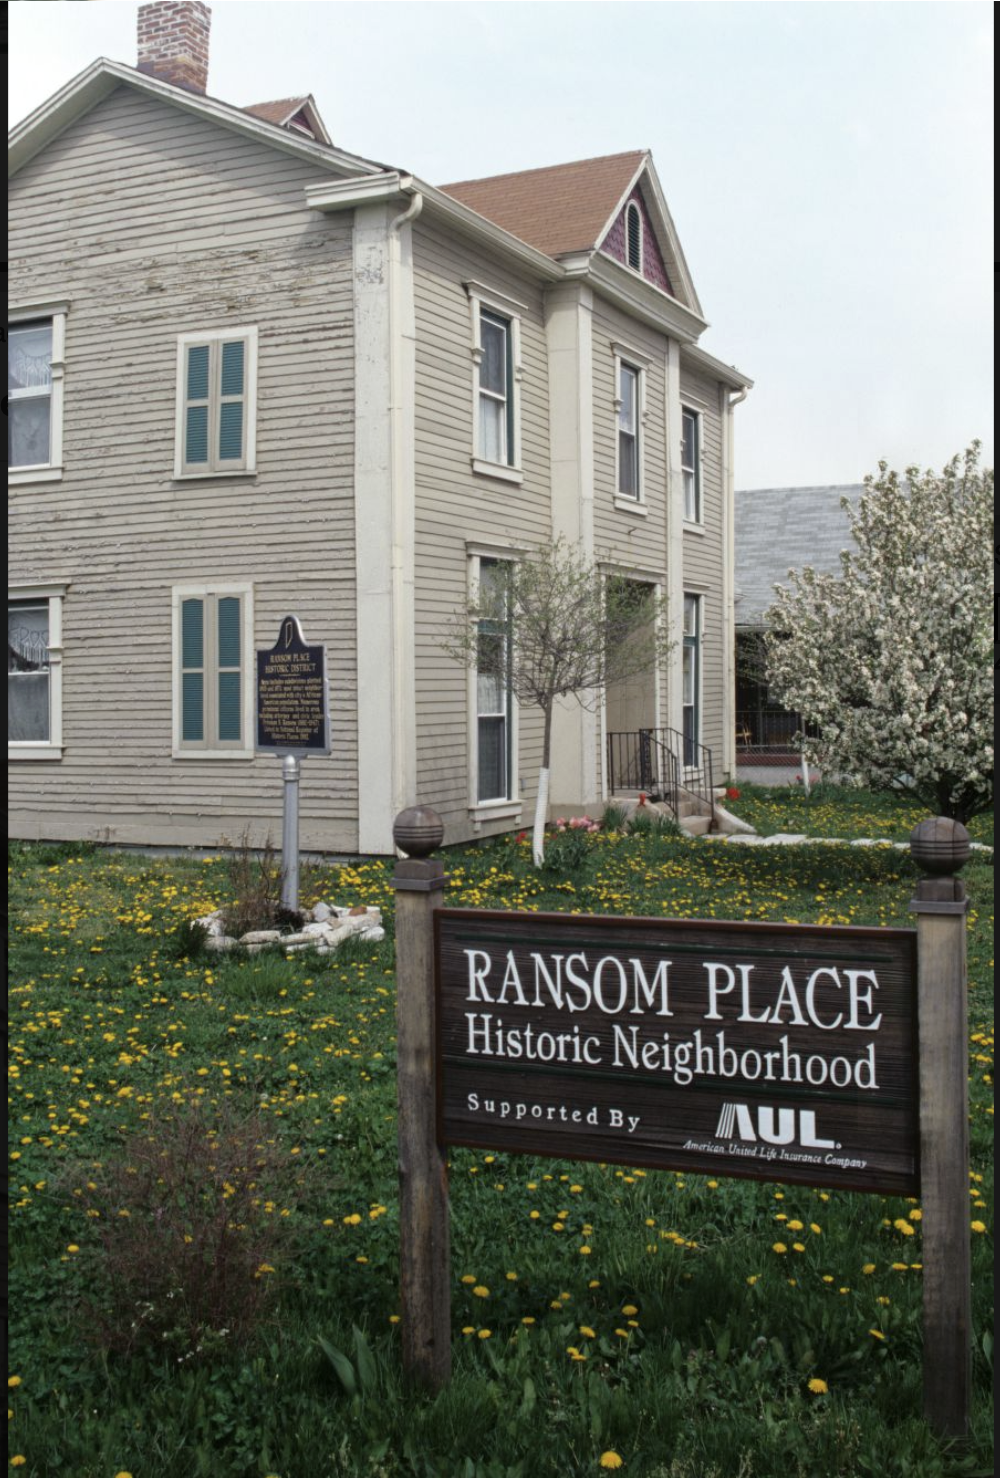 Ransom Place